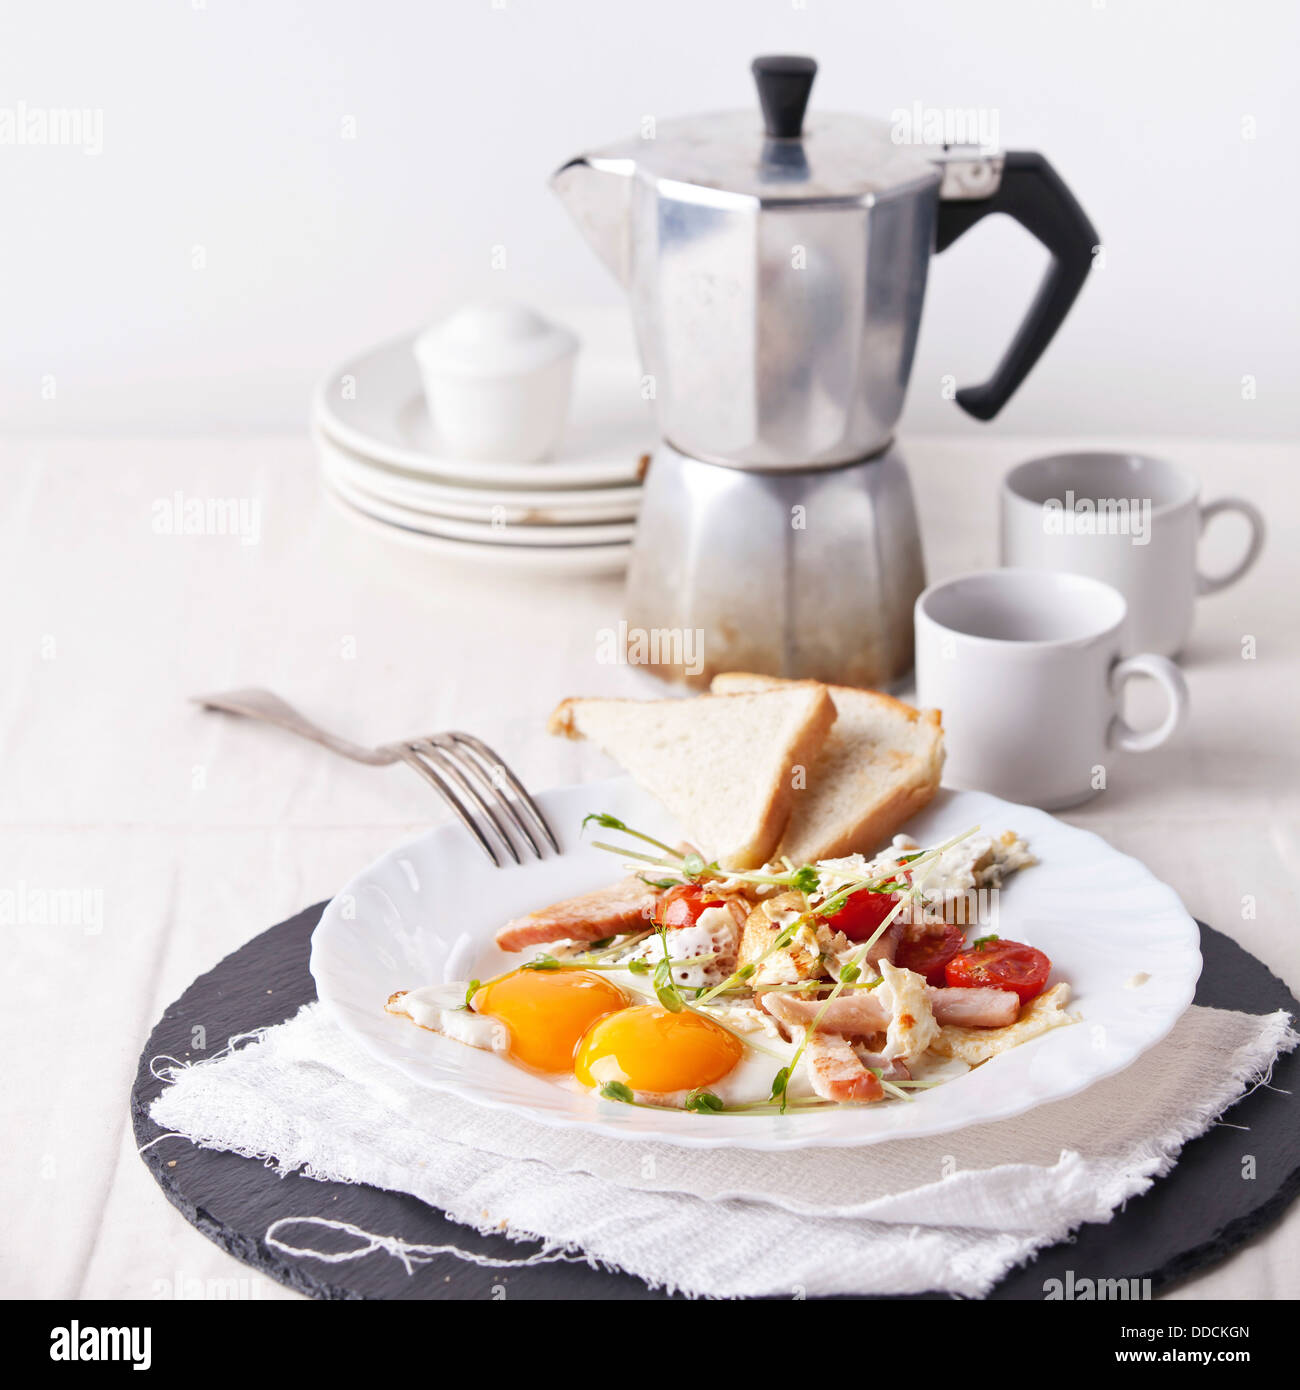 Ham and egg breakfast with toast, coffee and salad Stock Photo